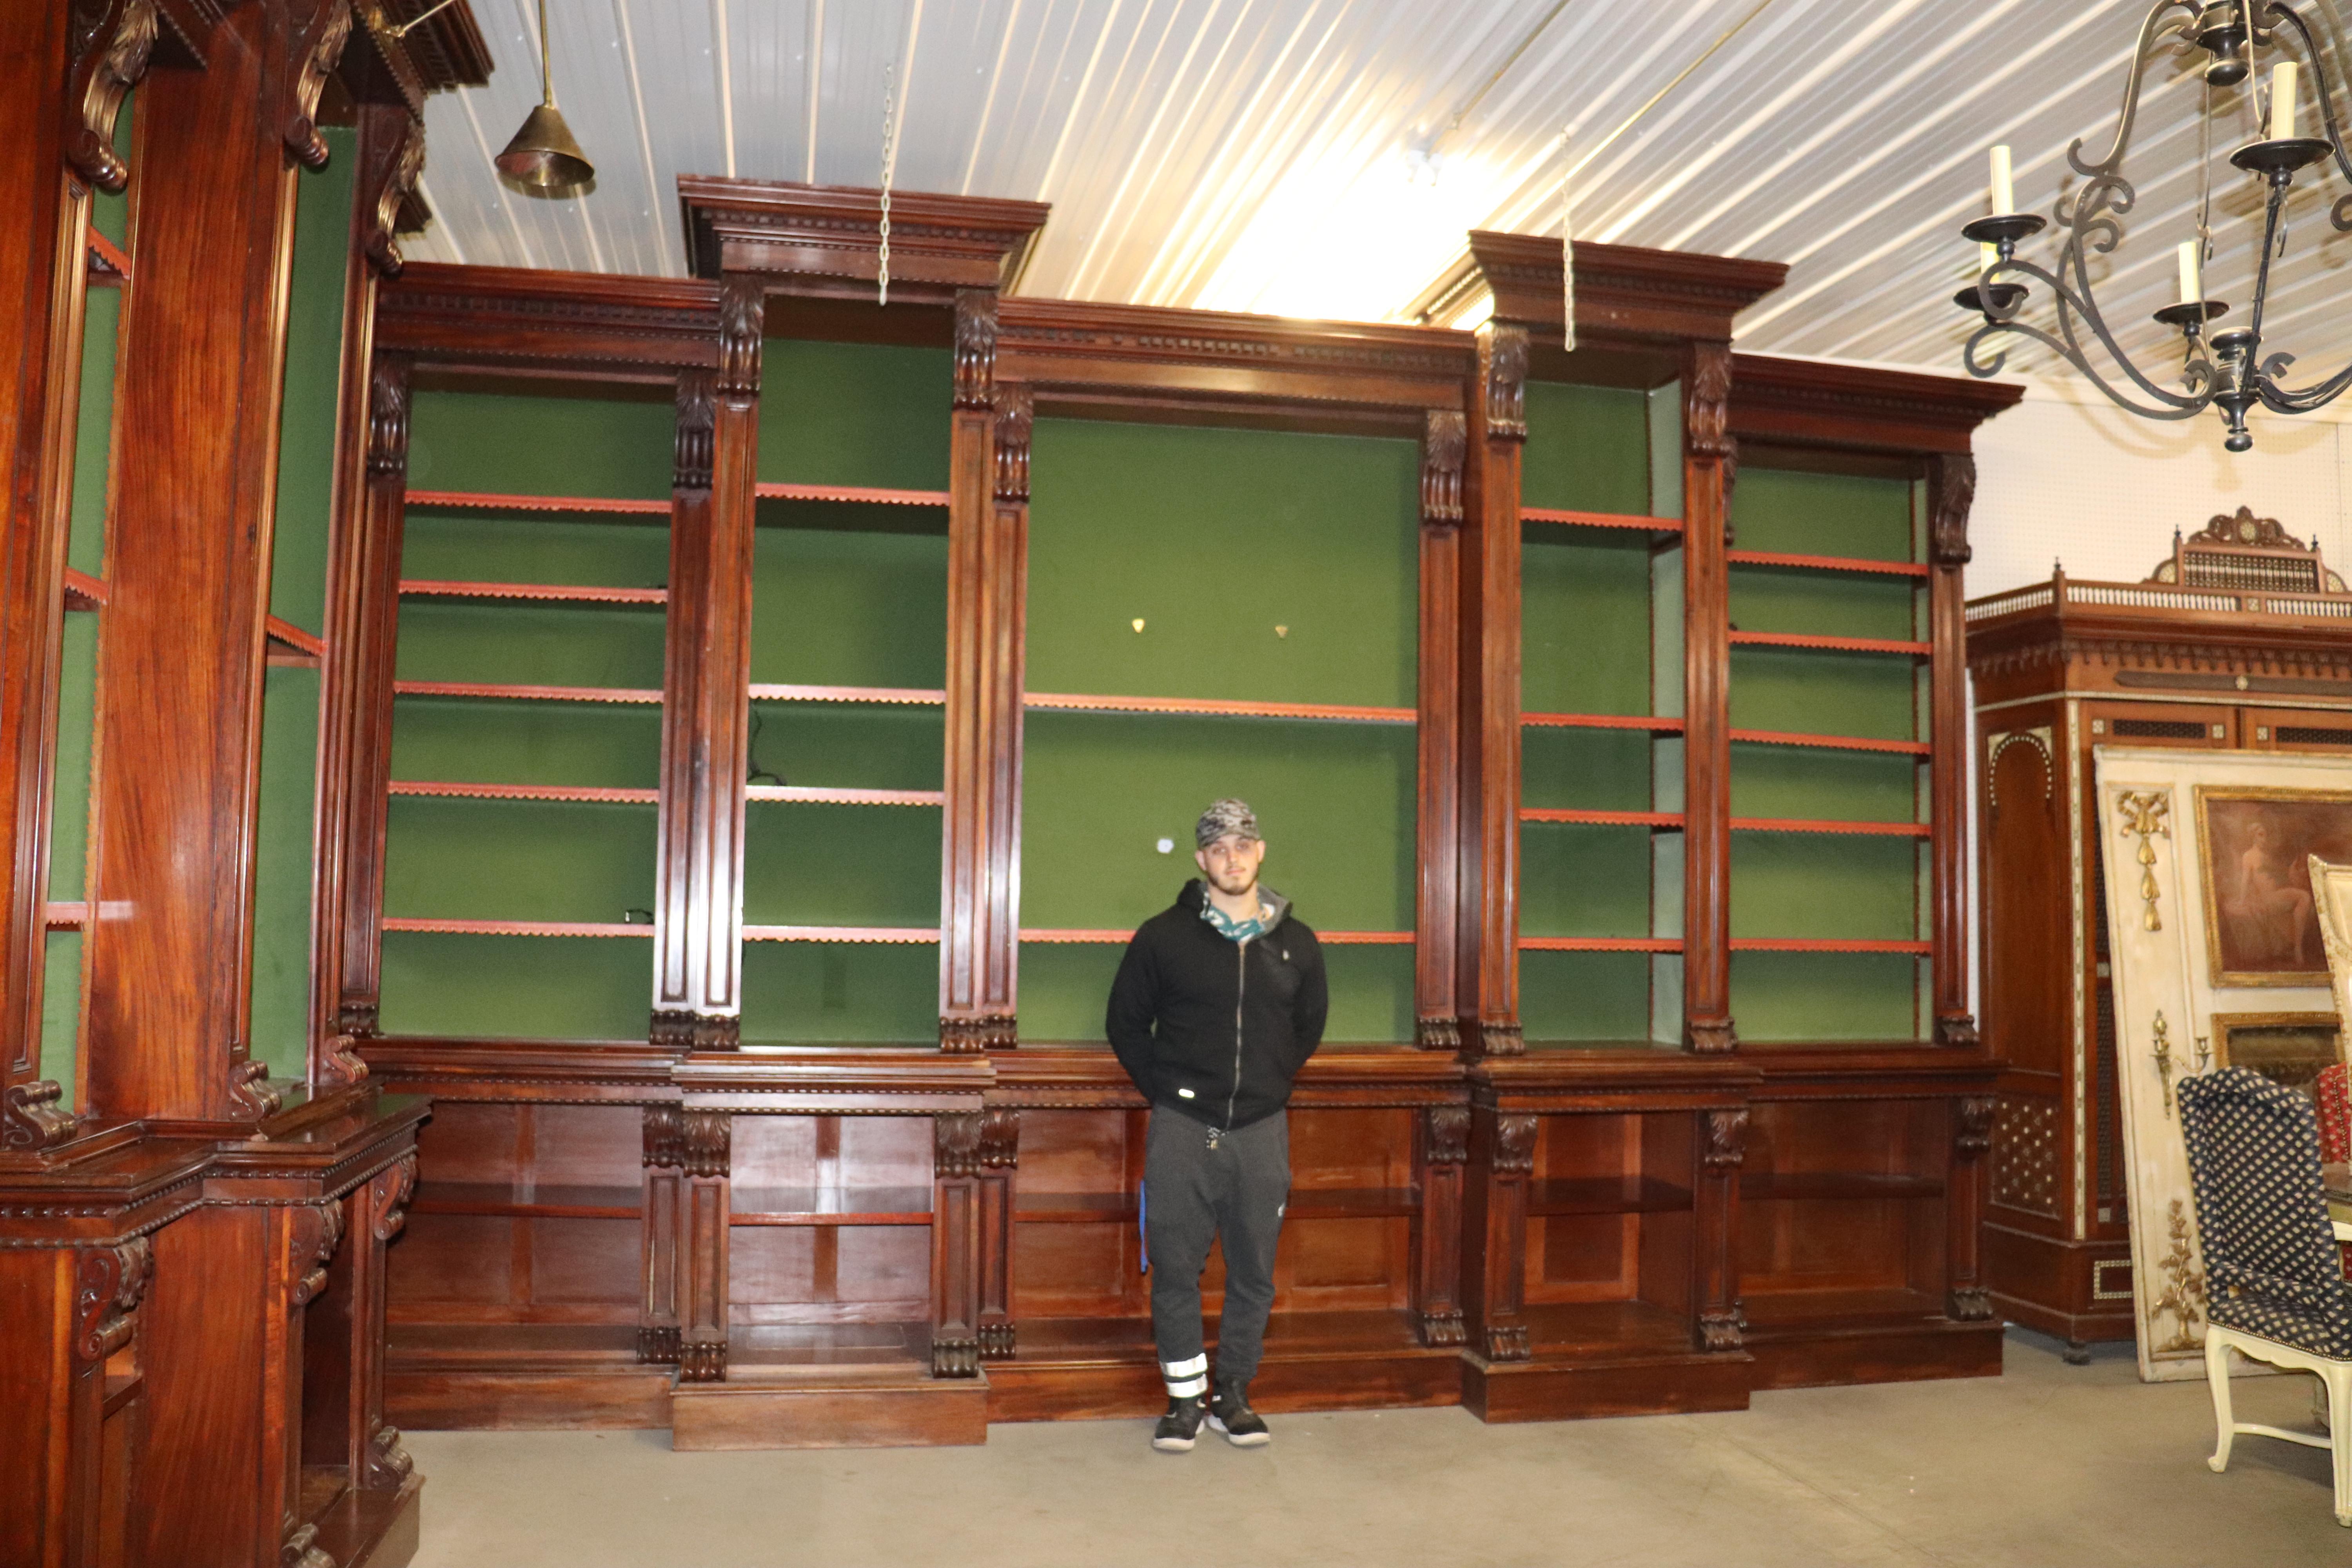 This is part of a 3-piece set and can be purchased as a set or separately. The bookcases were custom made for a bank owned by the Dupont family. They are made up of many pieces and do come completely apart. They have all been wired for electricity.